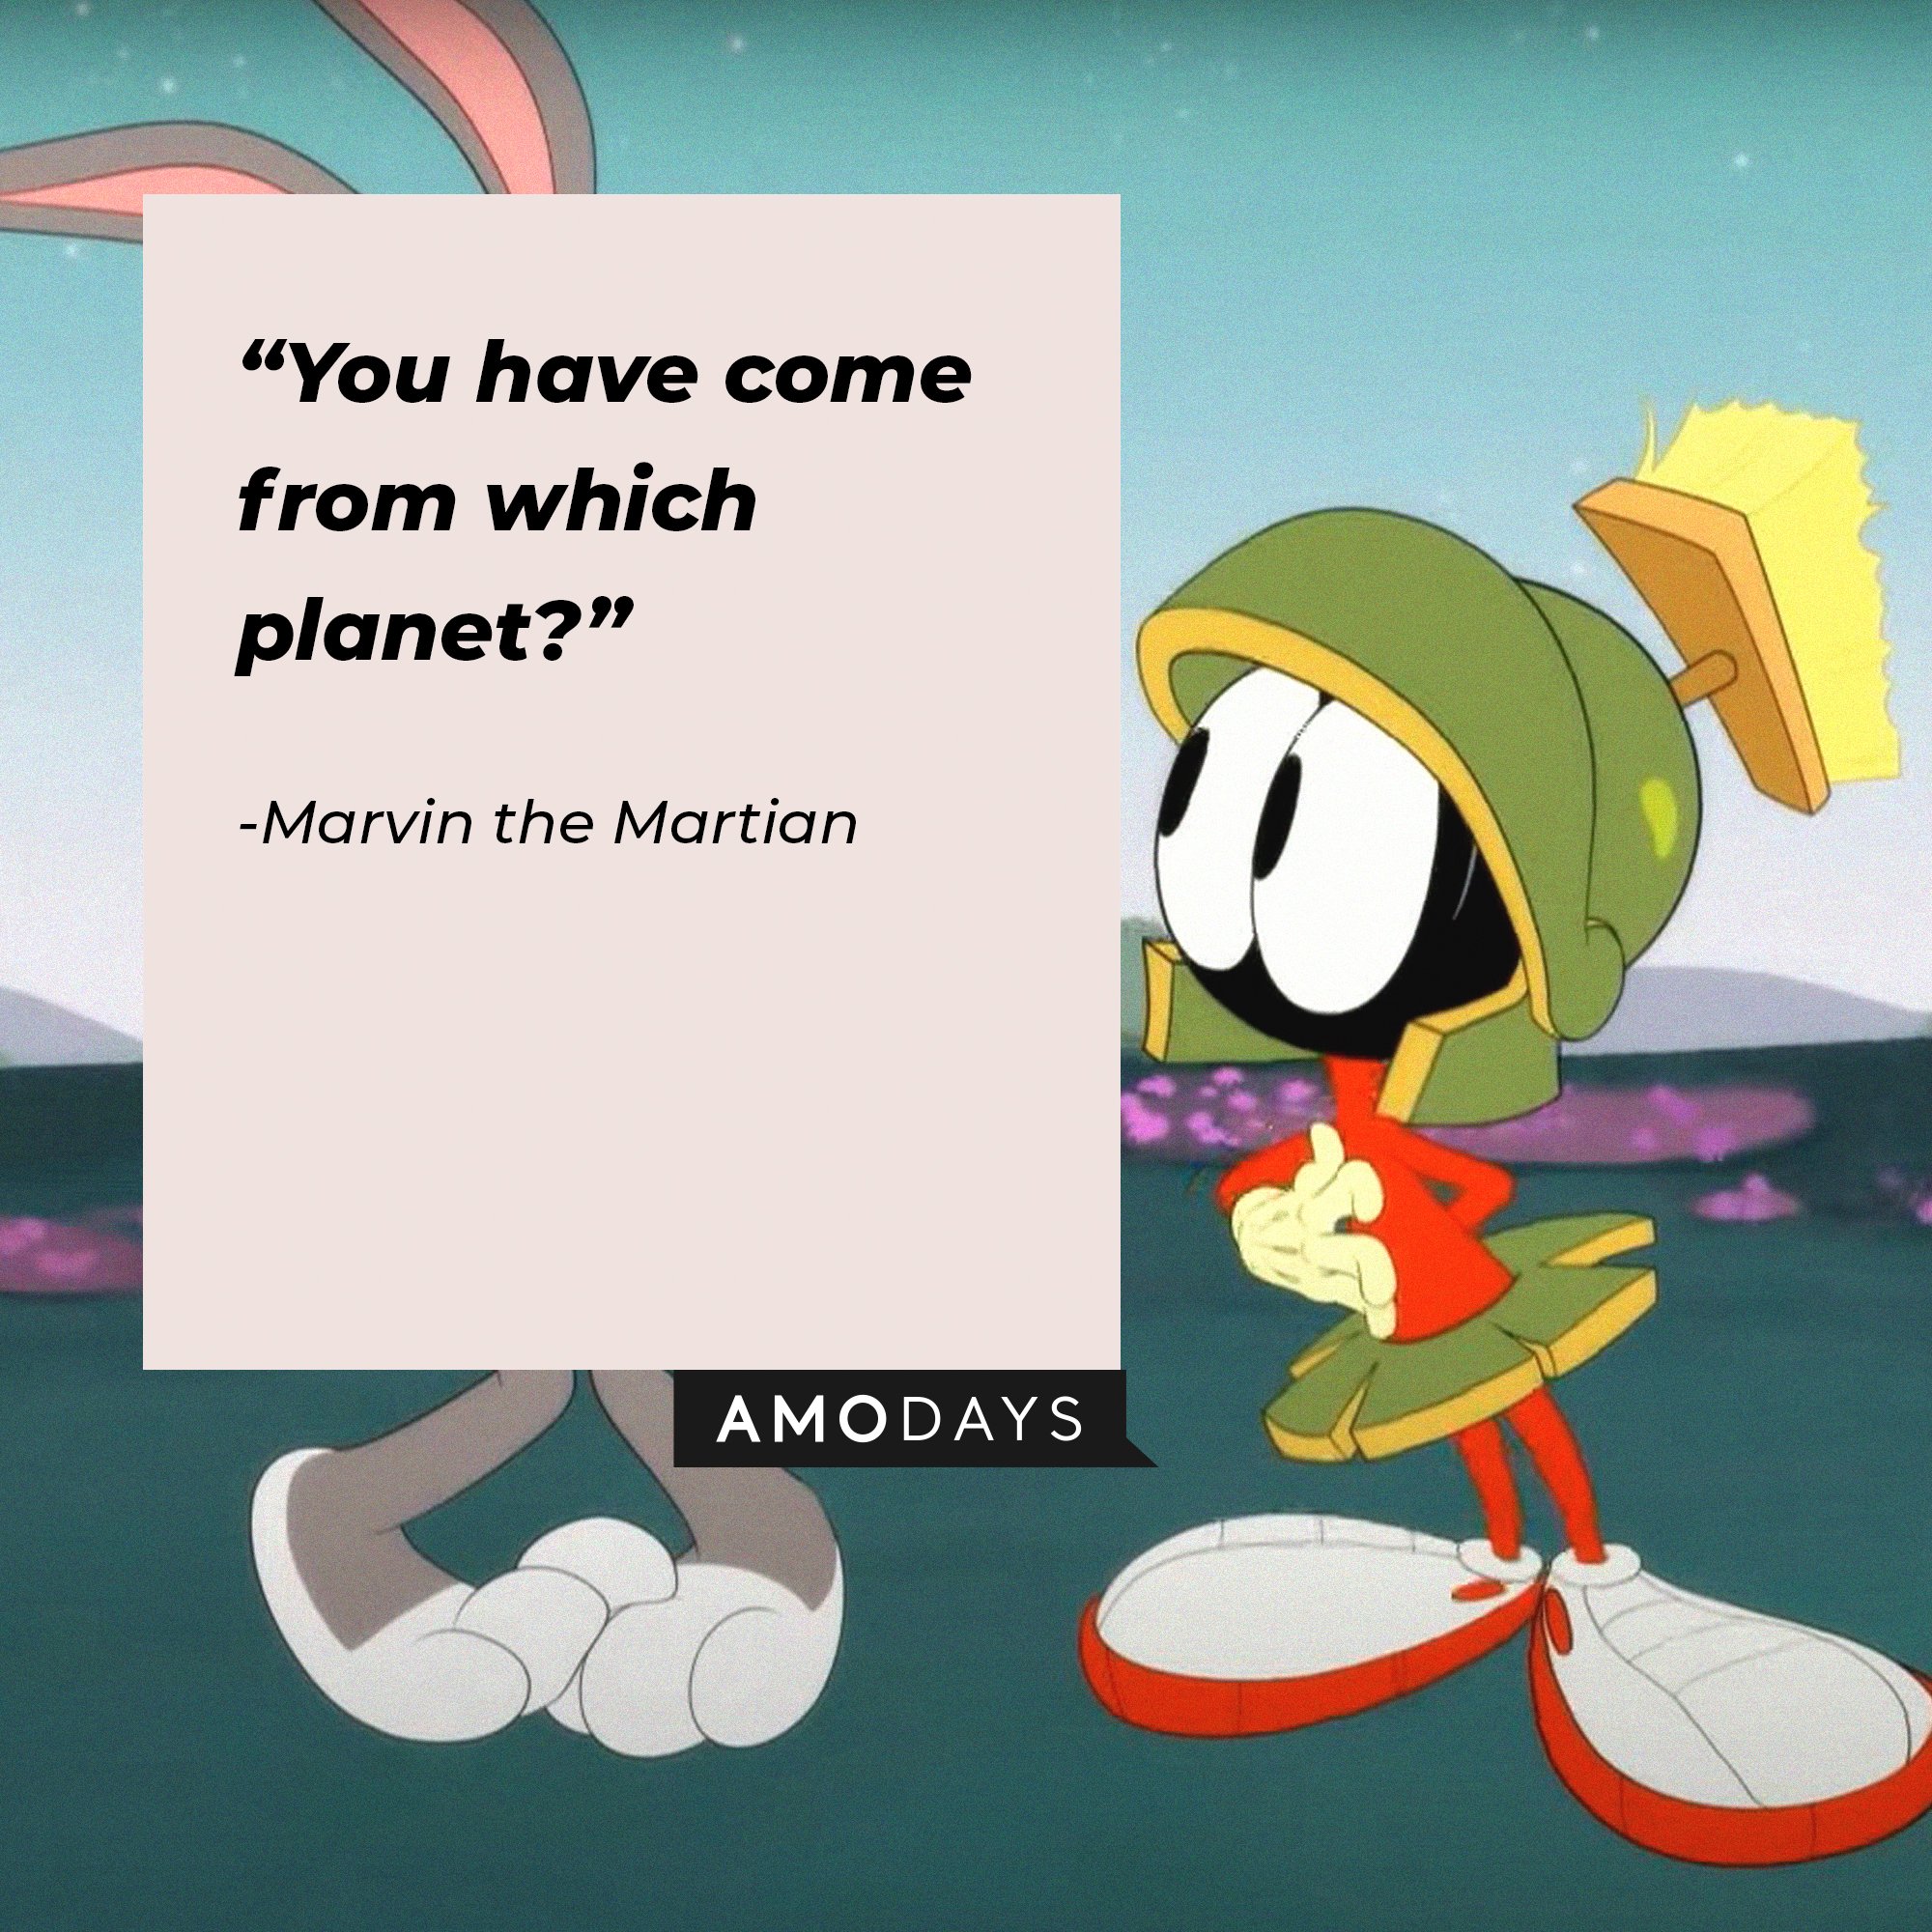 Marvin the Martian’s quote: “You have come from which planet?” | Image: AmoDays